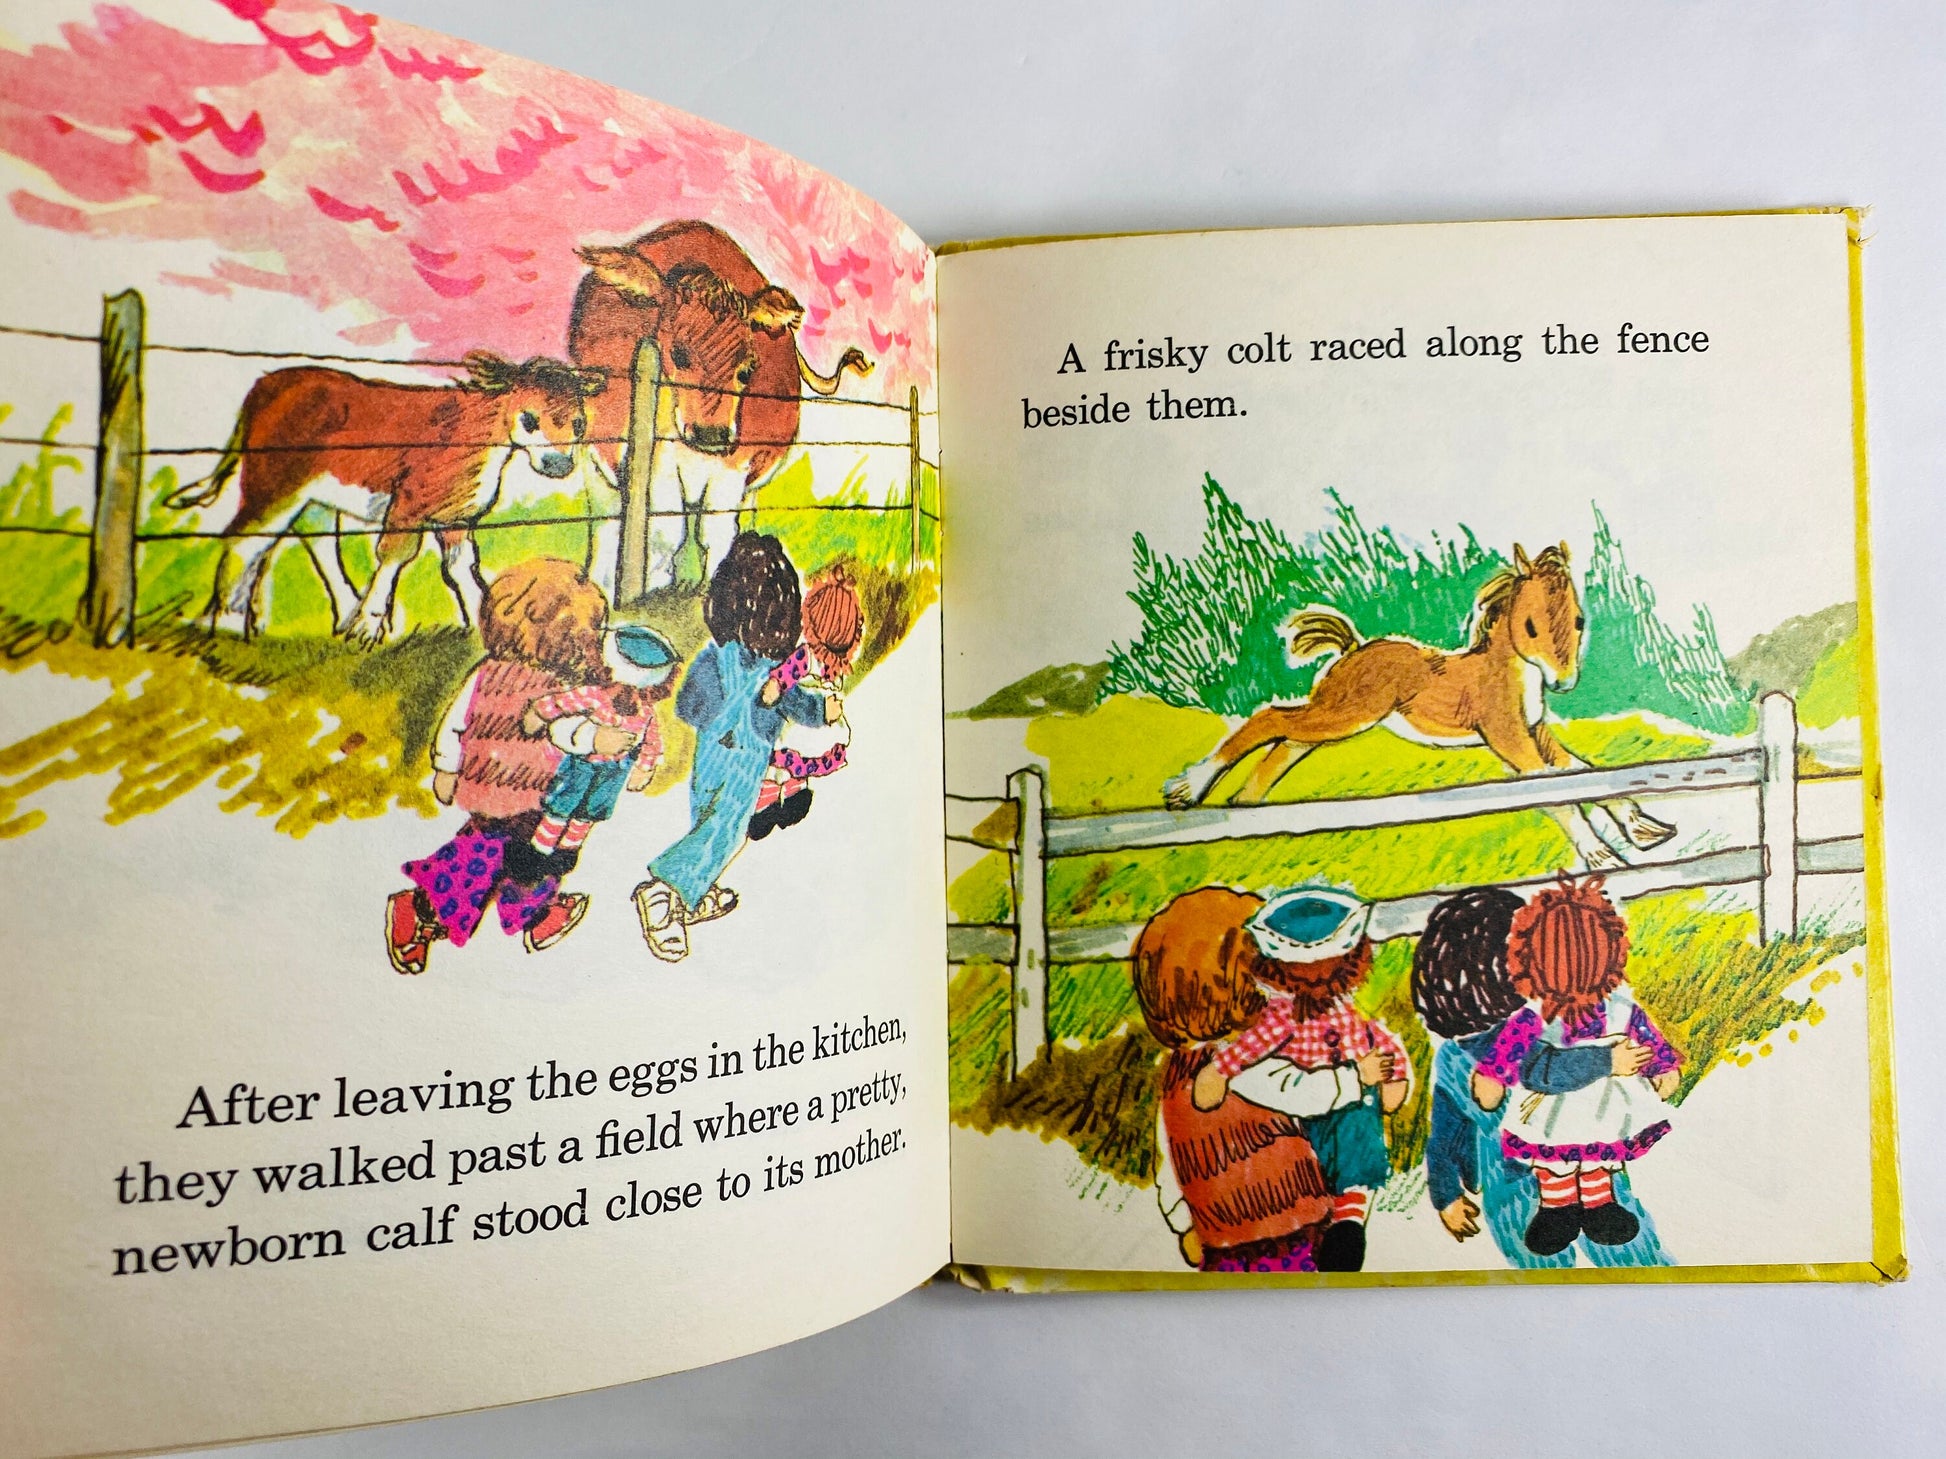 Raggedy Ann and Andy on the Farm FIRST EDITION vintage Whitman Little Golden Book circa 1975